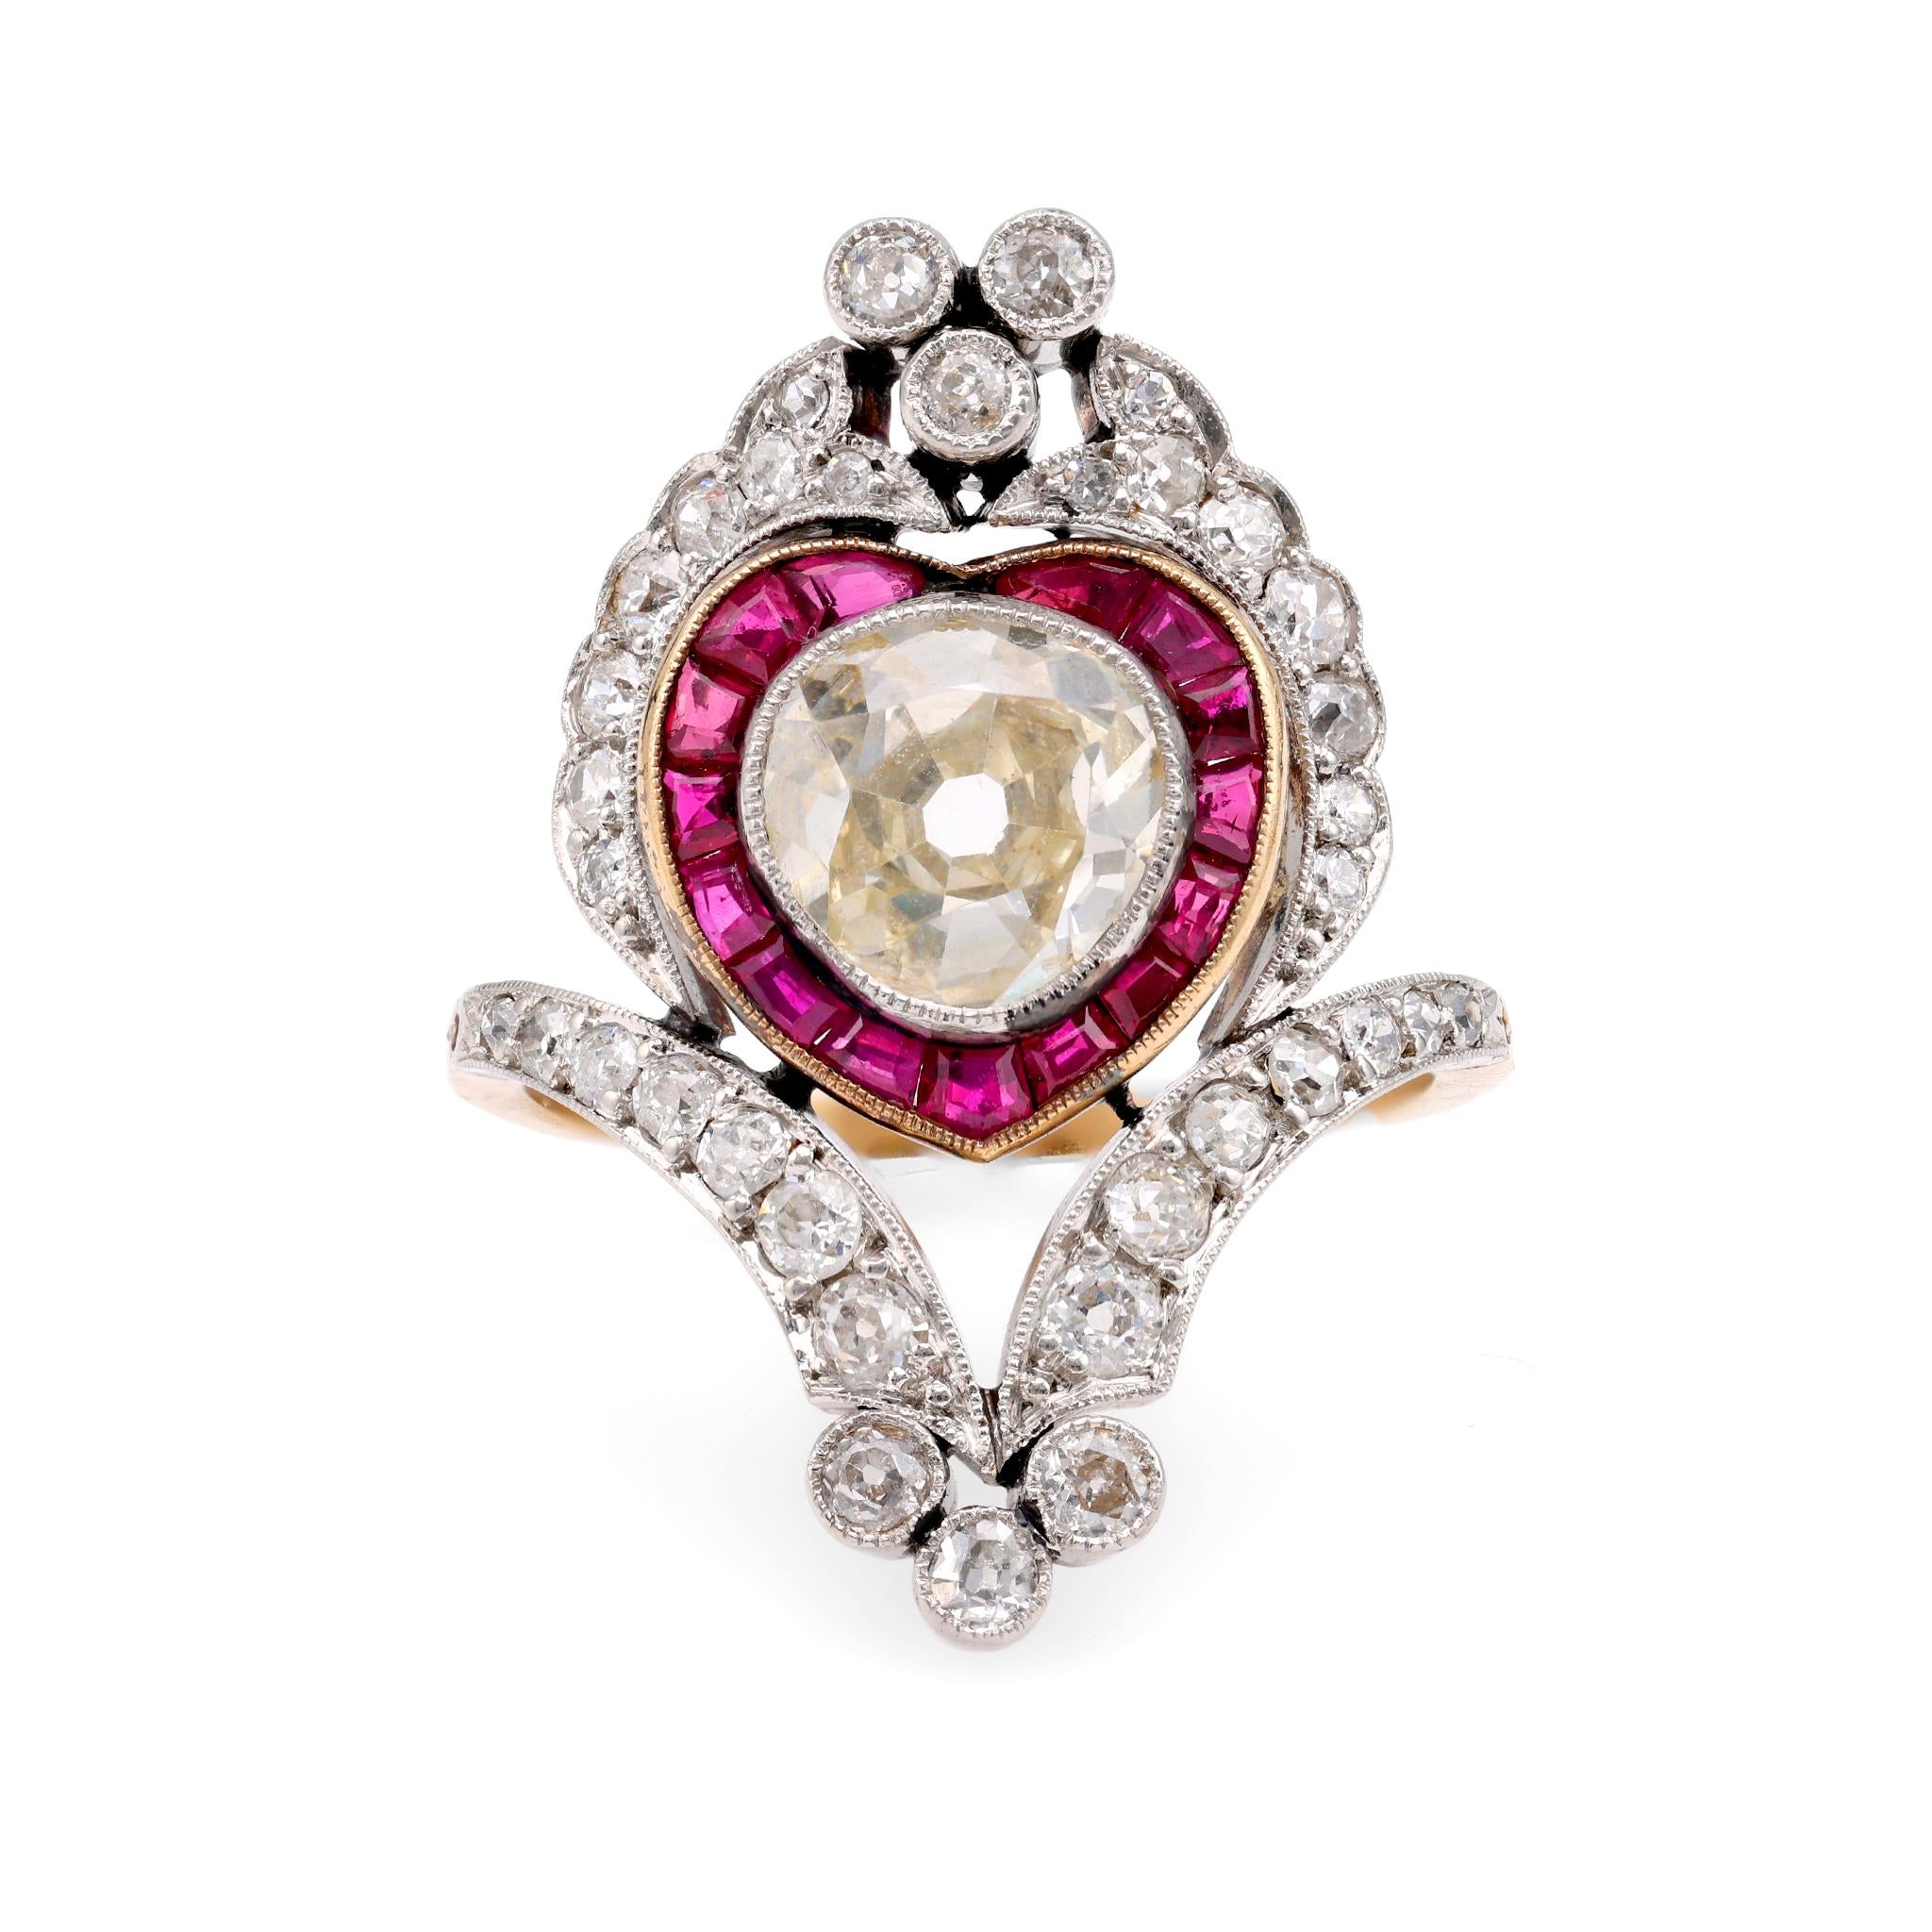 Belle Époque Style  2.12 Carat Diamond Ruby 18K Yellow Gold Cocktail Ring  Jack Weir & Sons   